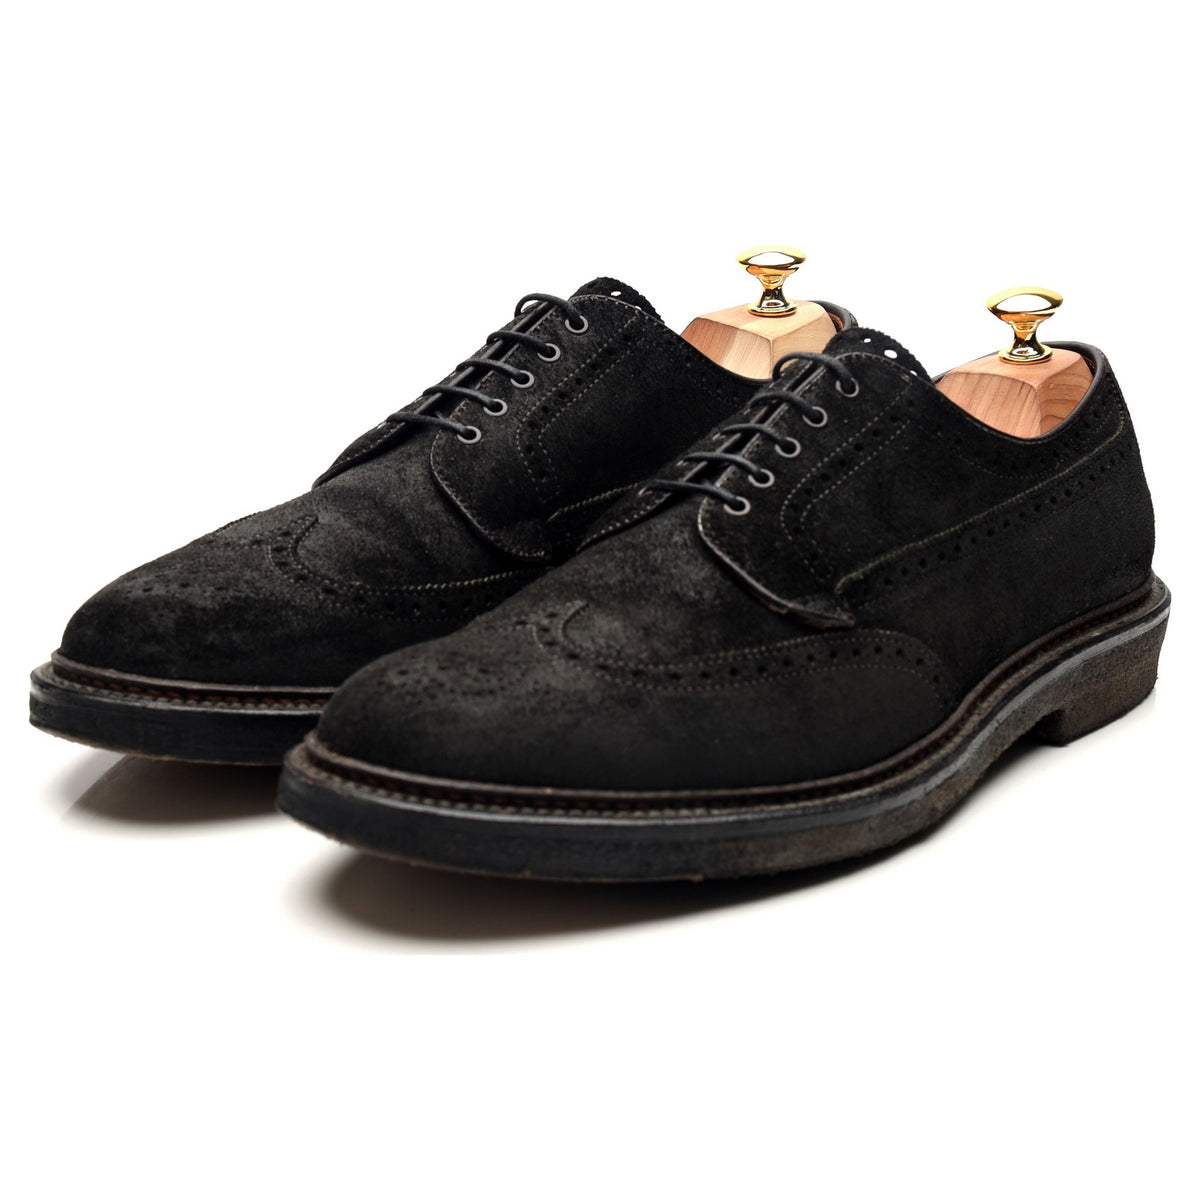 &#39;31910&#39; Black Waxed Suede Derby Brogues UK 10.5 US 11 E